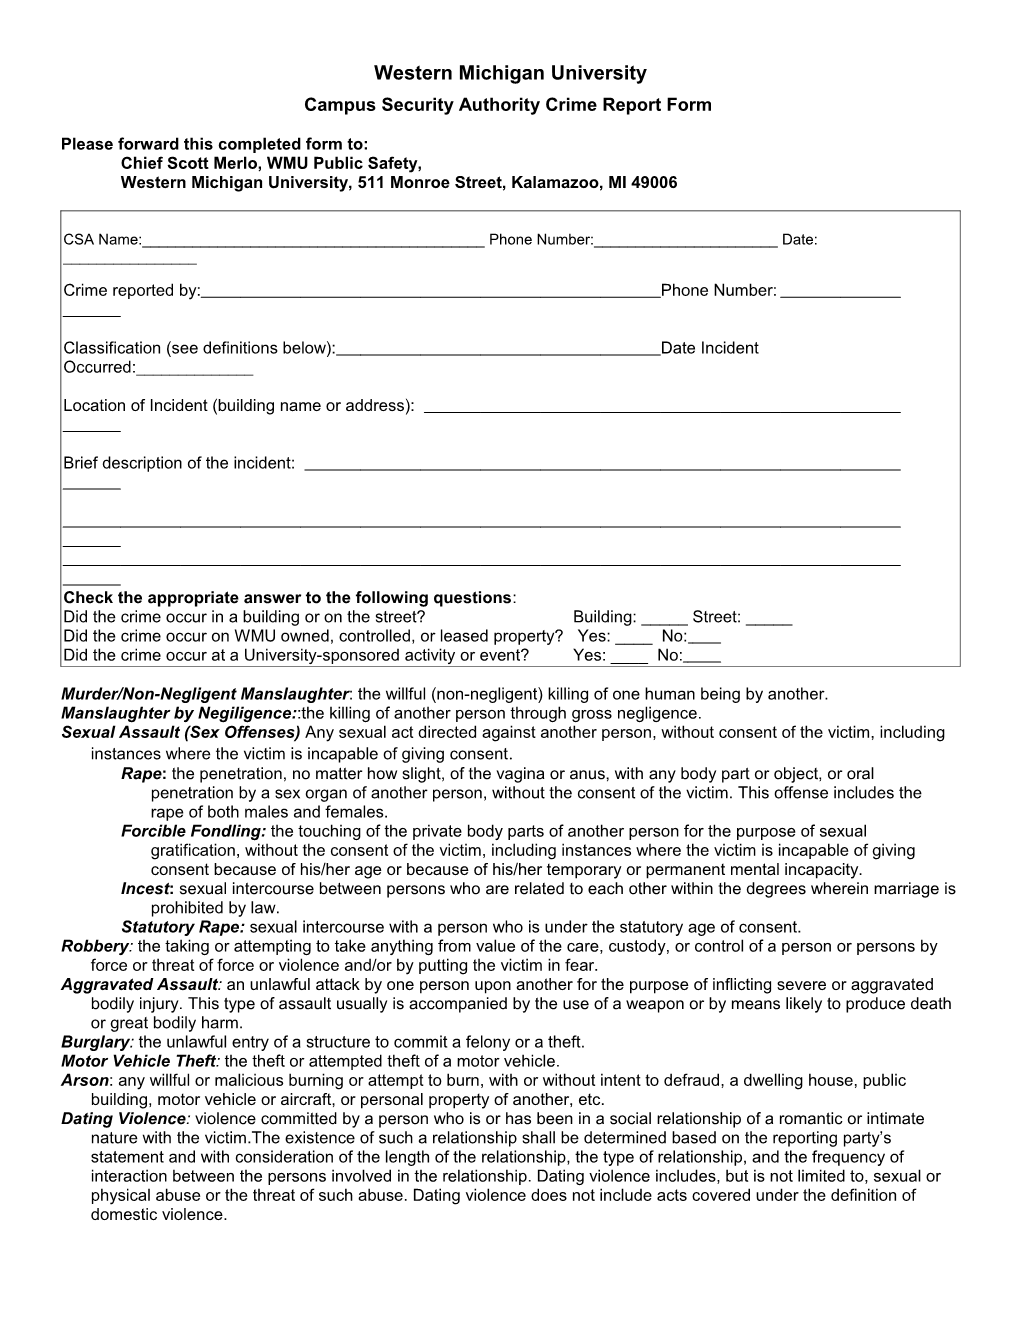 Campus Security Authority Crime Report Form